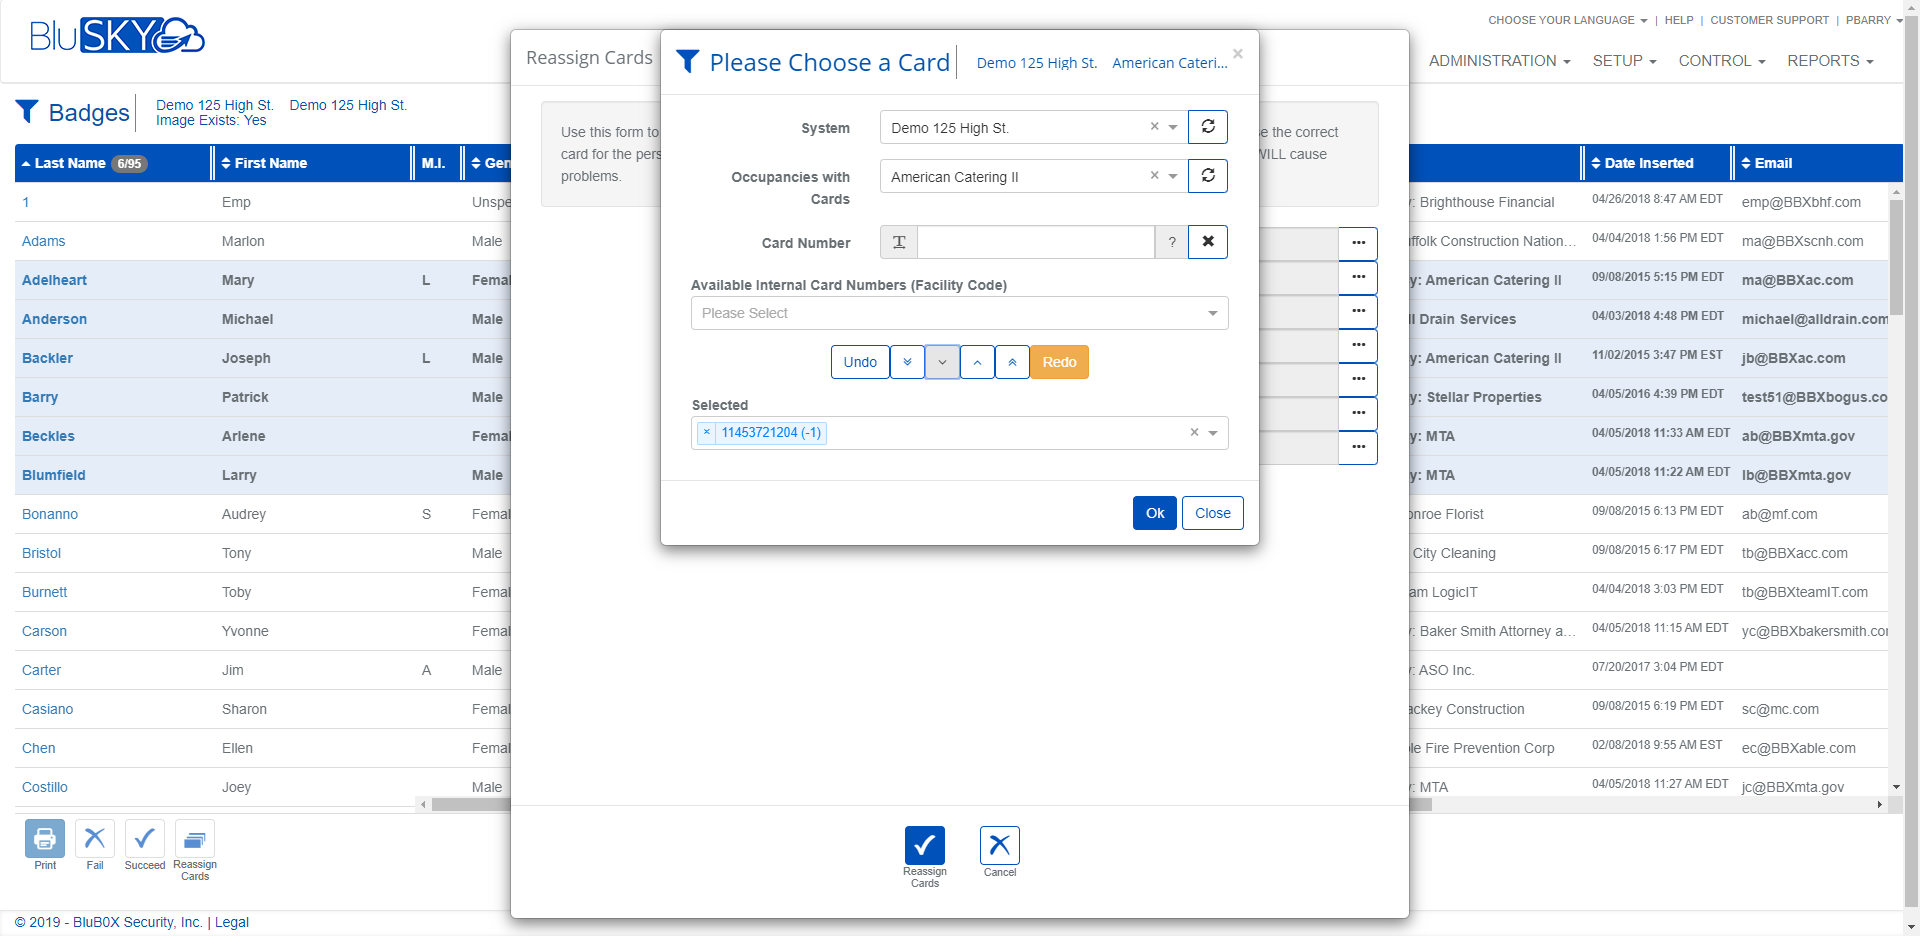 Badges - Reassign Cards - Choose A Card Dialog.PNG